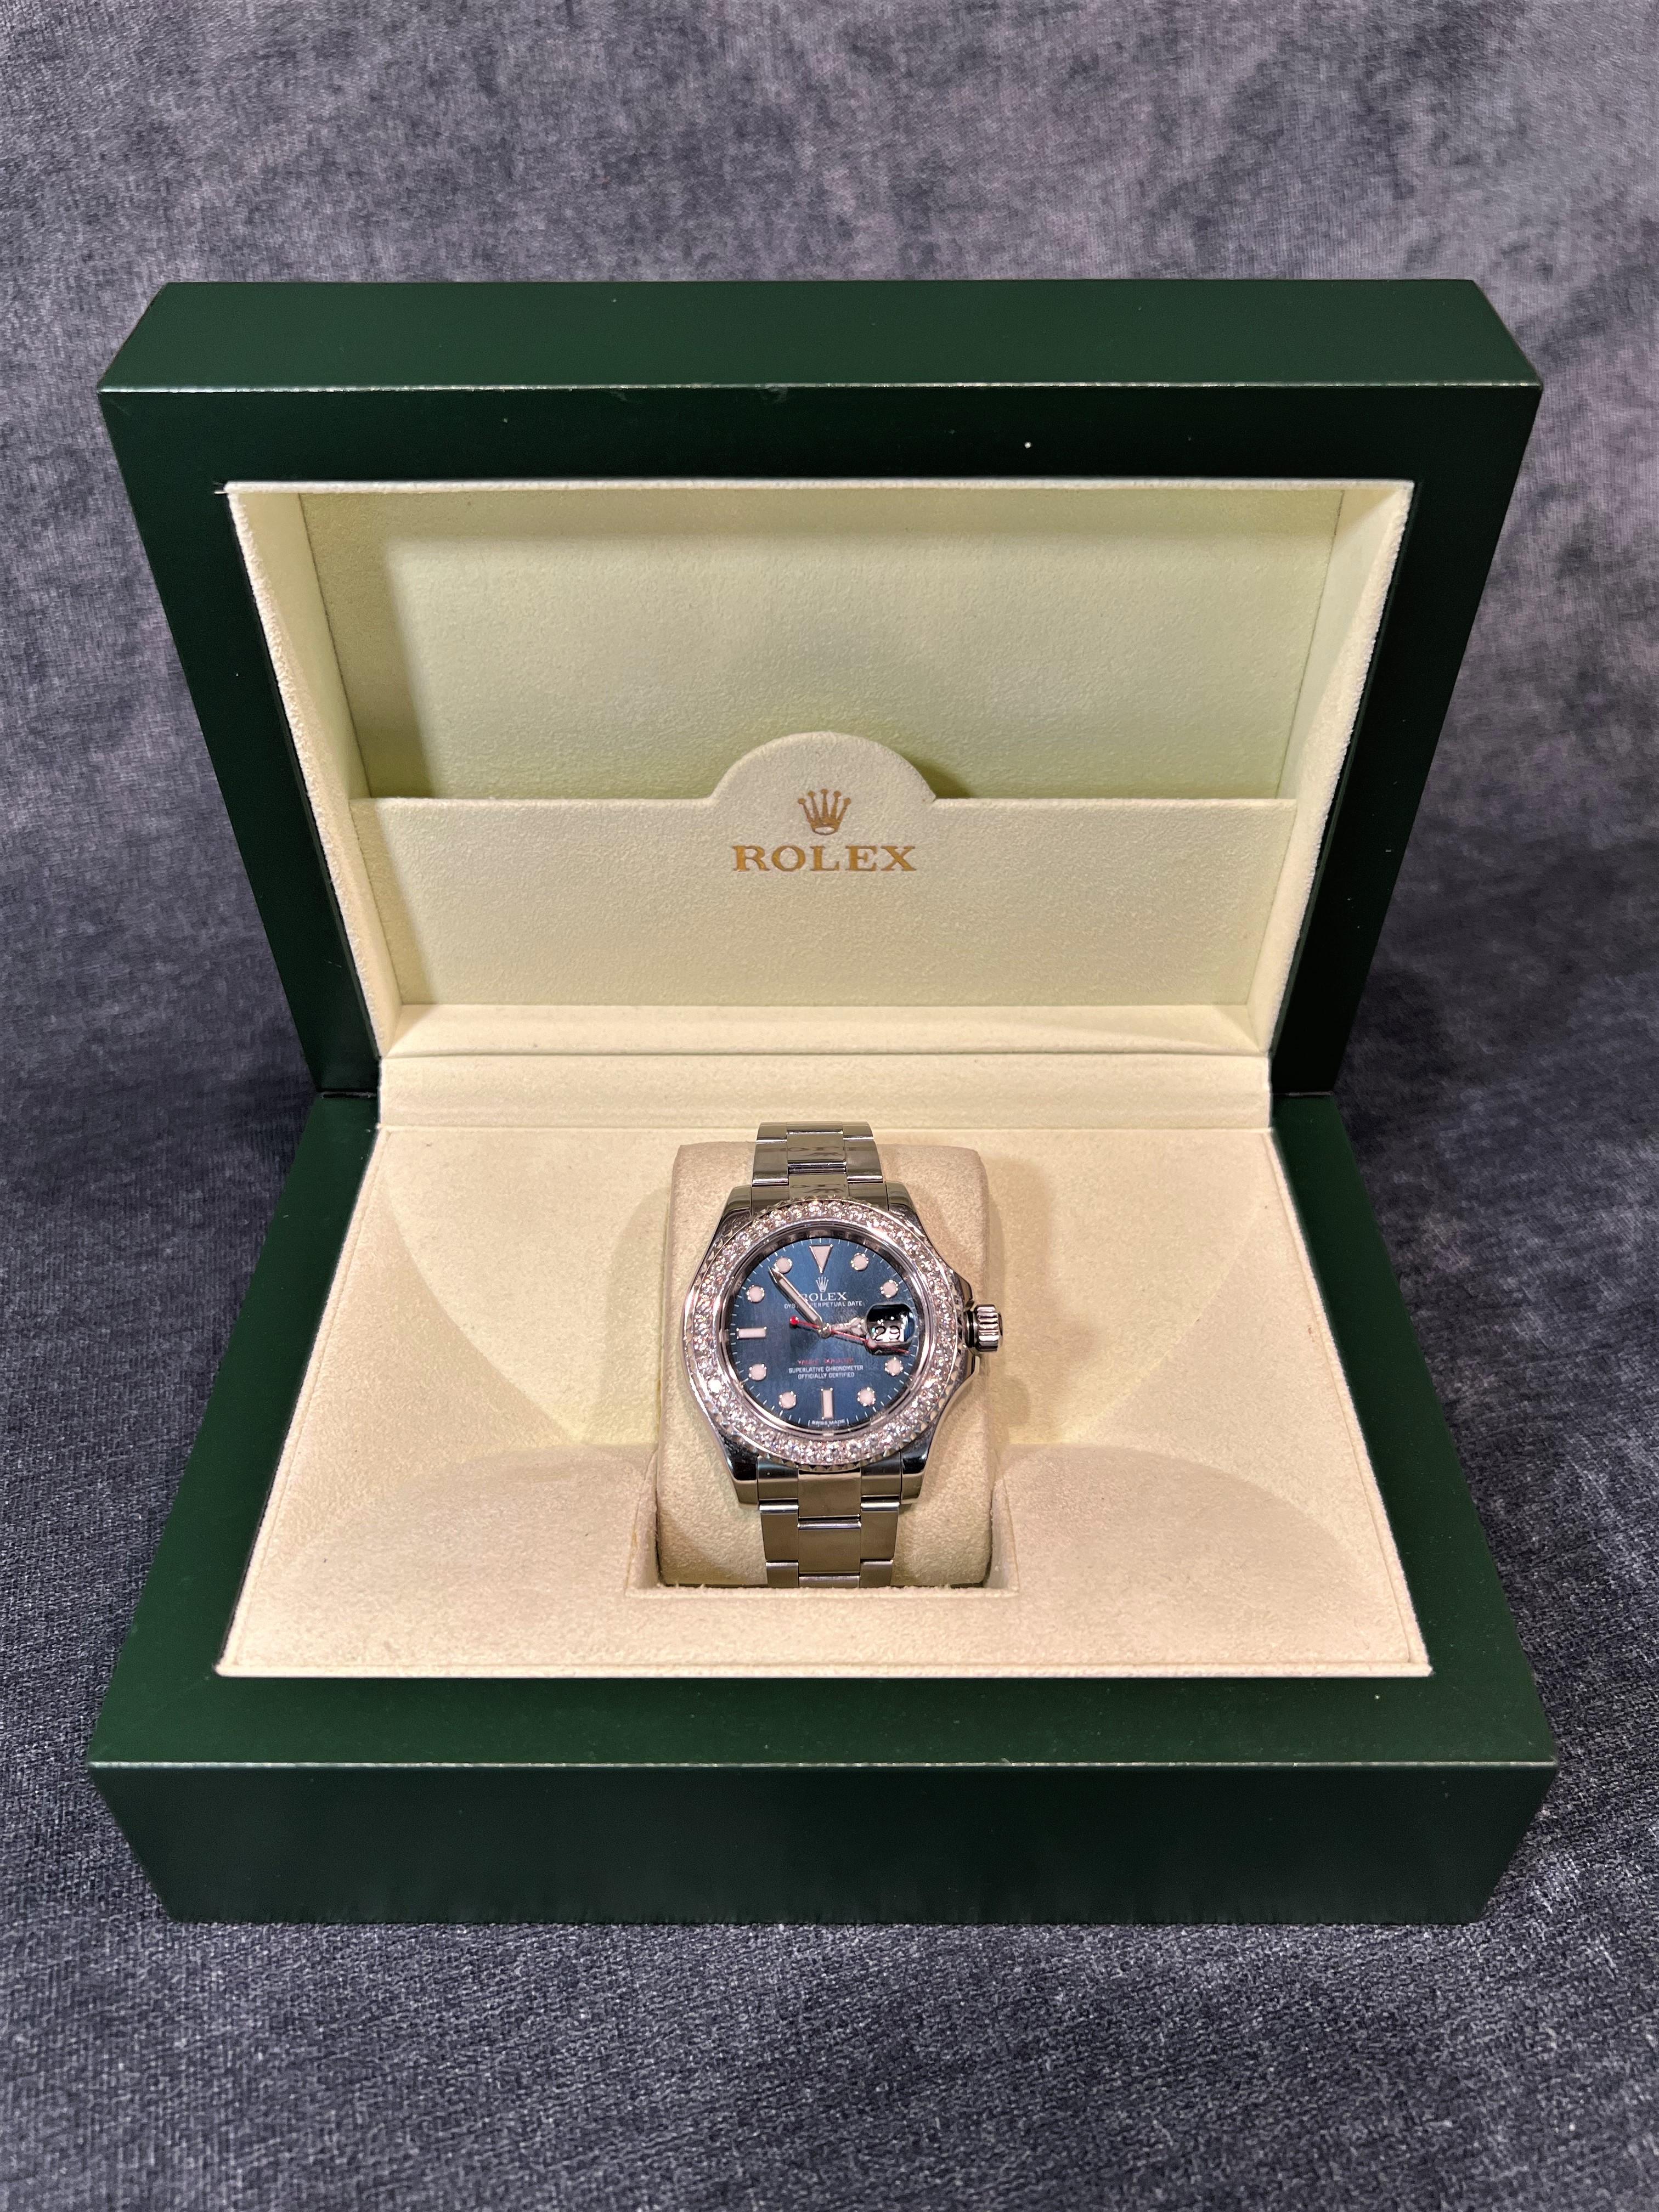 Rolex Oyster Perpetual Yacht-Master 2.56 CTW Diamond Wristwatch For Sale 6